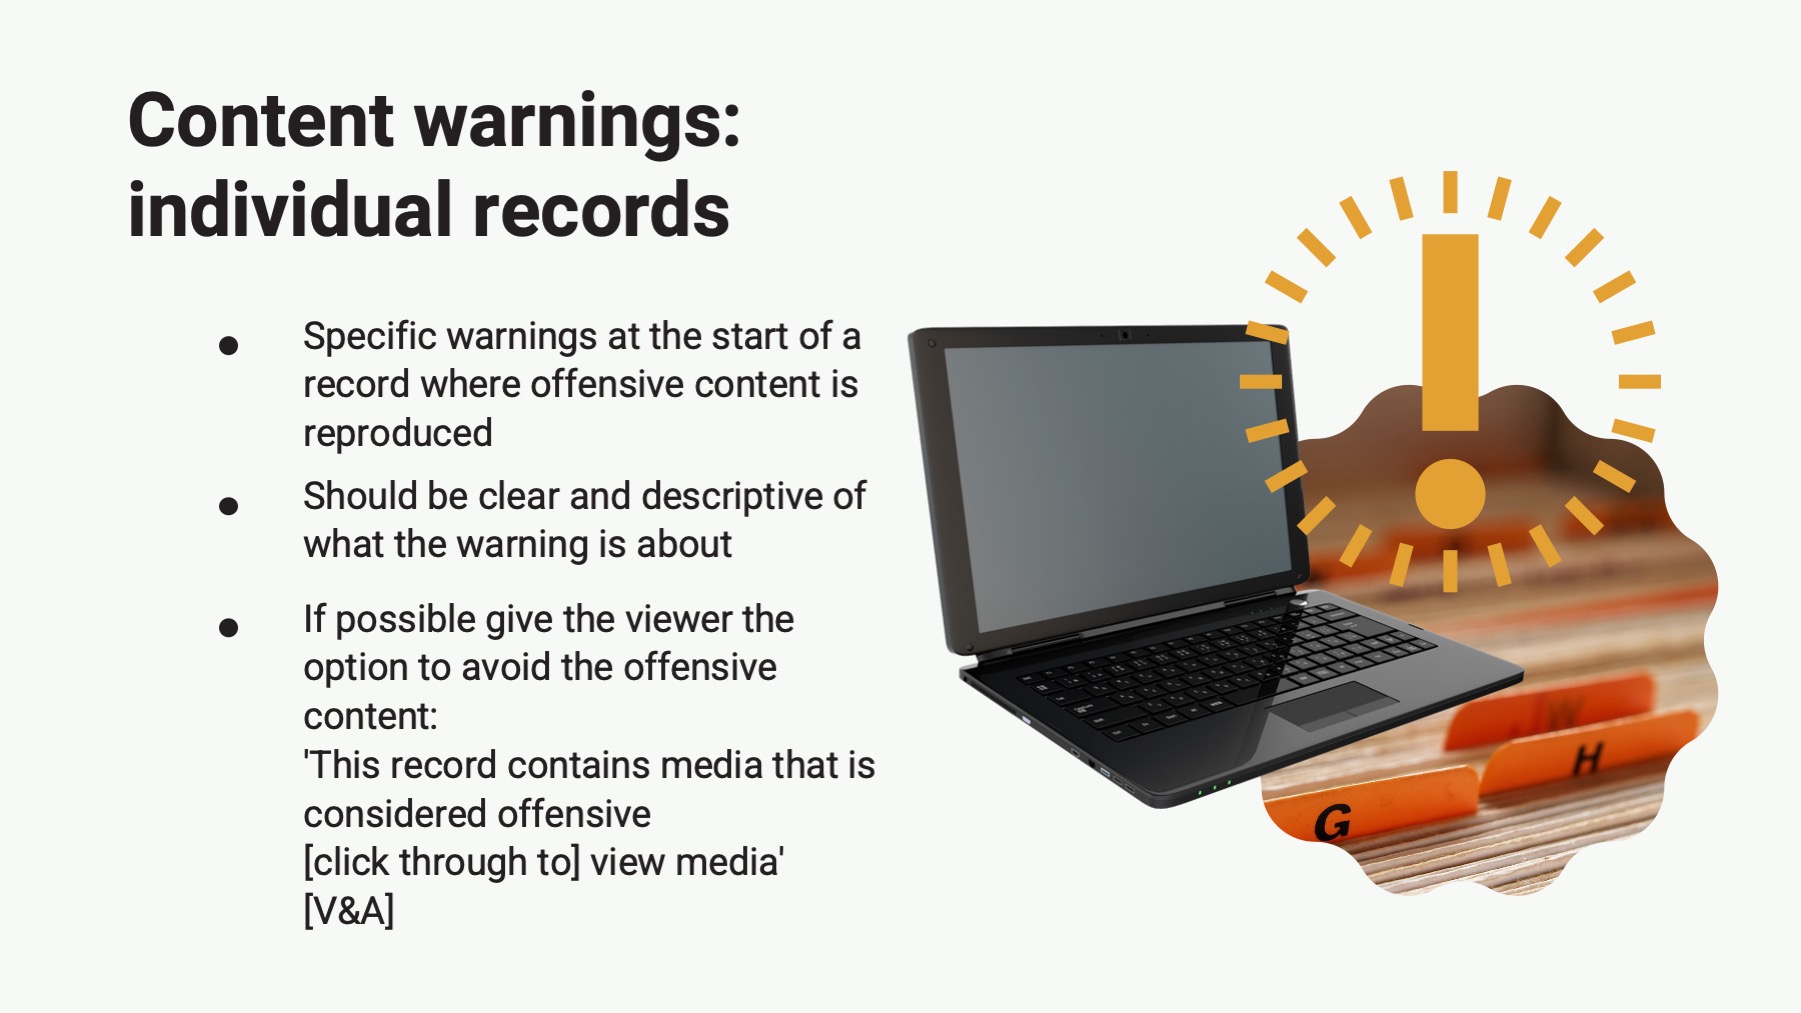 slide with the text: Content warnings: individual records Specific warnings at the start of a record where offensive content is reproduced Should be clear and descriptive of what the warning is about If possible give the viewer the option to avoid the offensive content: This record contains media that is considered offensive [click through to] view media* [V&A]